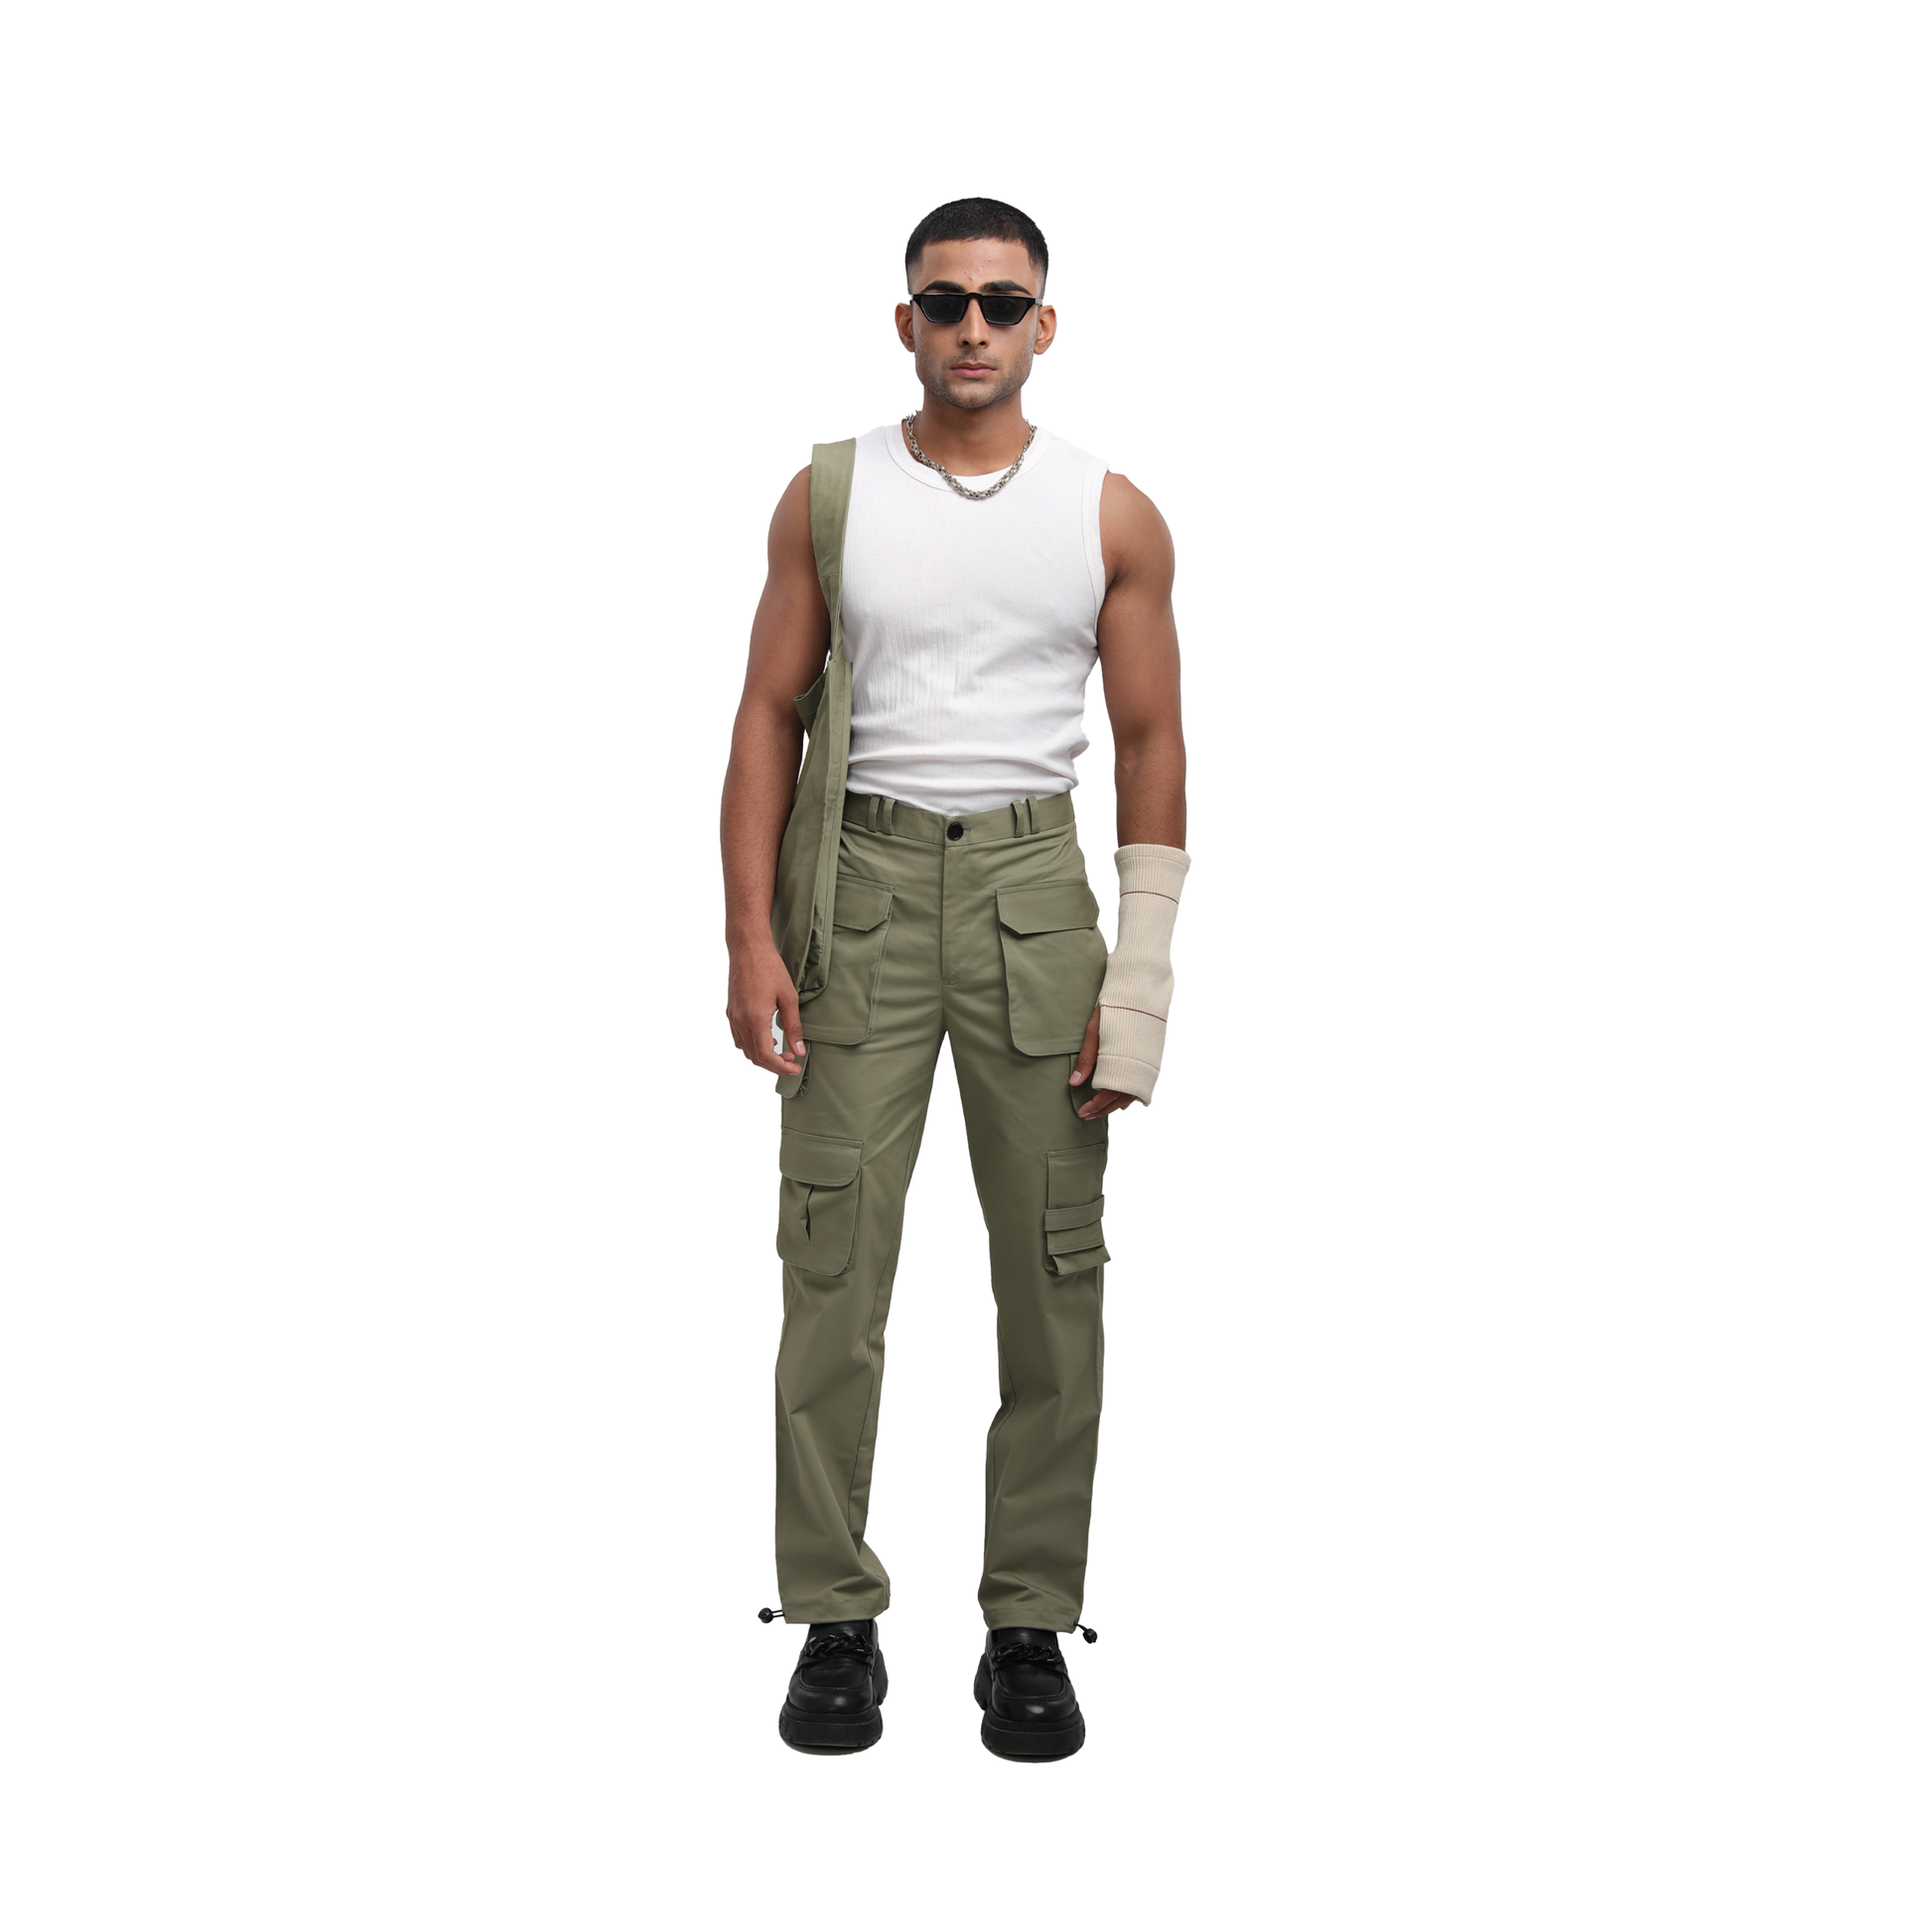 MENS CARGOS, ASPARAGUS COLOURWAY, WARPING THEORIES, PURE COTTON PANTS, UTILITY PANTS, MENSWEAR UTILITY, PANTS FOR WOMEN, WOMENS FASHION, POCKET DETAILS, UTILITY POCKETS, TAILORED FIT, people also ask